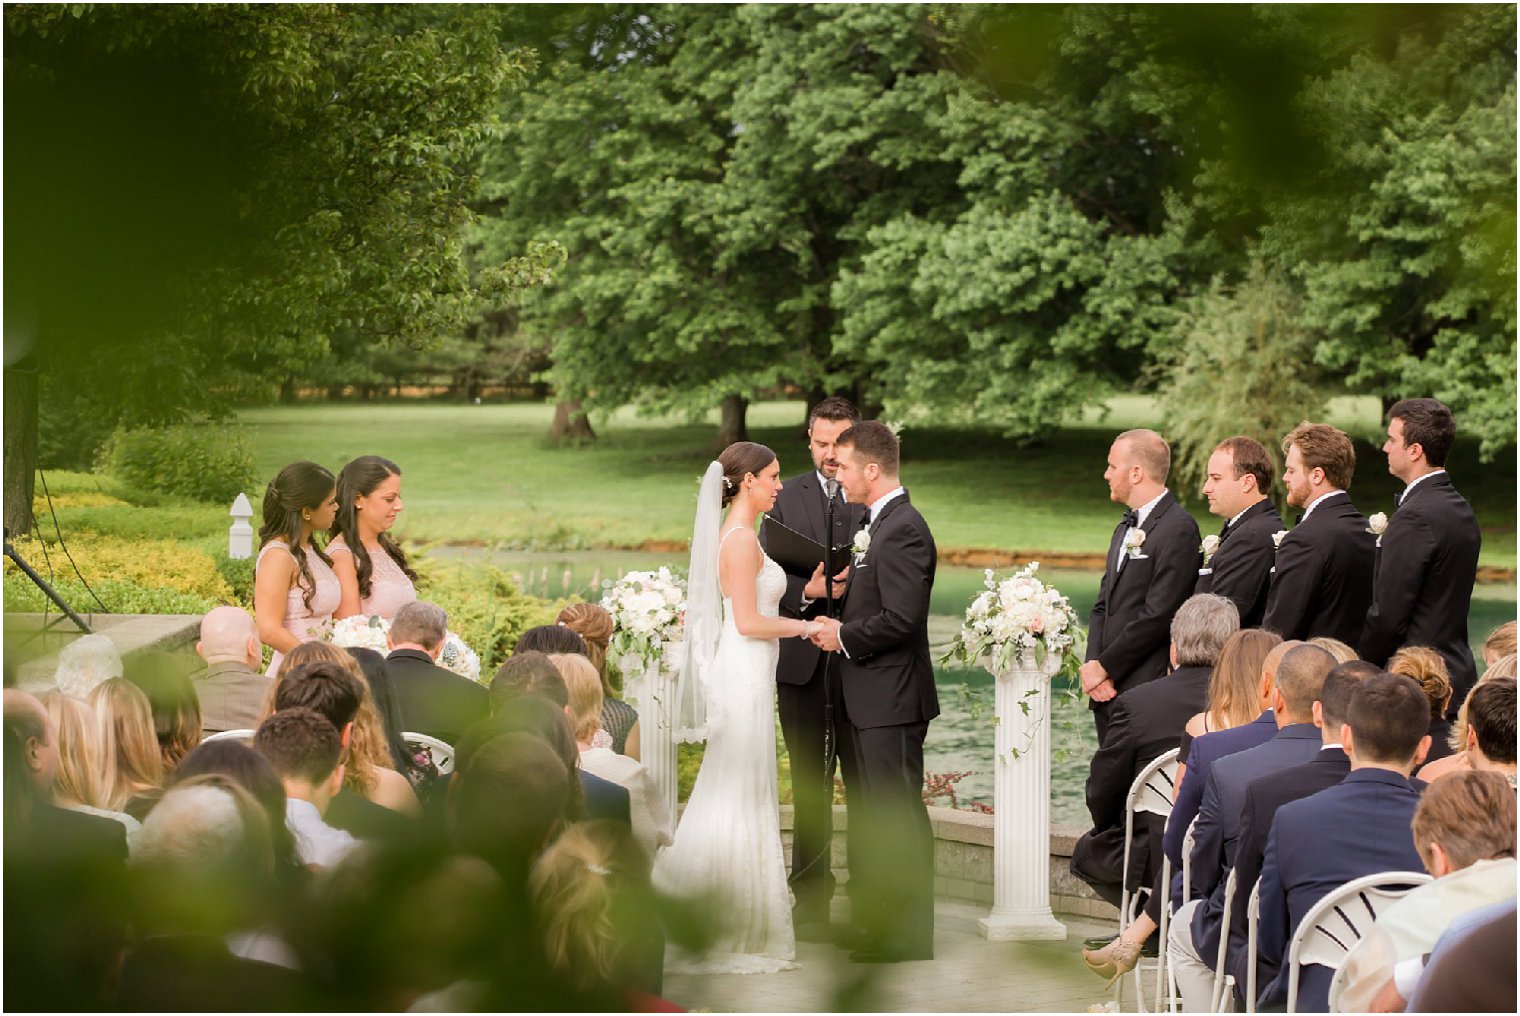 Spring wedding at Windows on the Water at Frogbridge